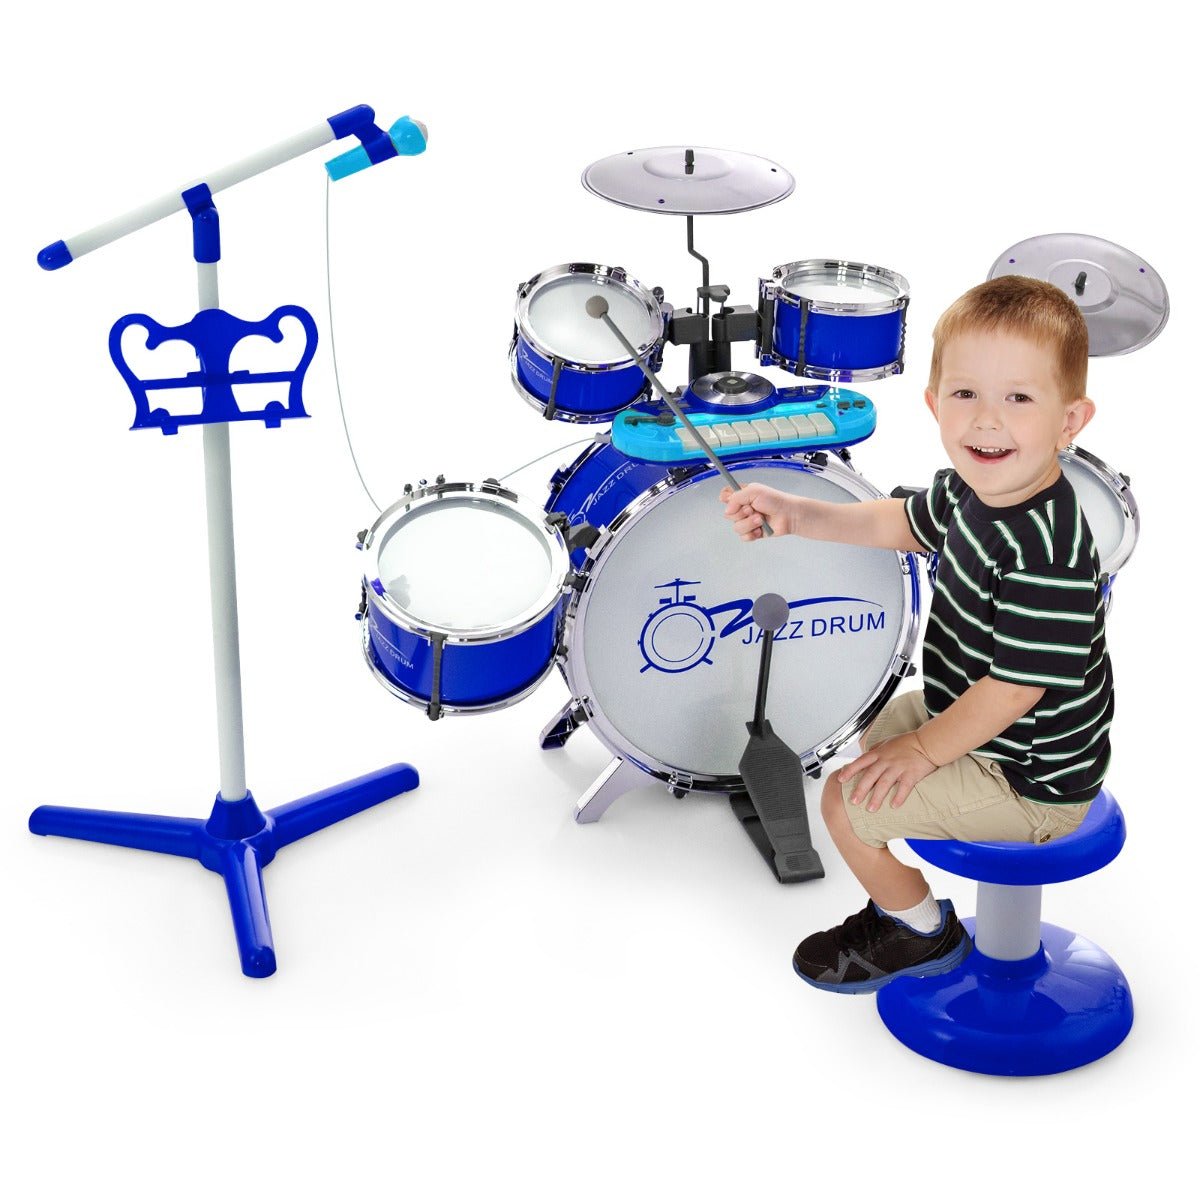 Vibrant Blue Kids Drum Keyboard Set - Includes Stool & Mic Stand